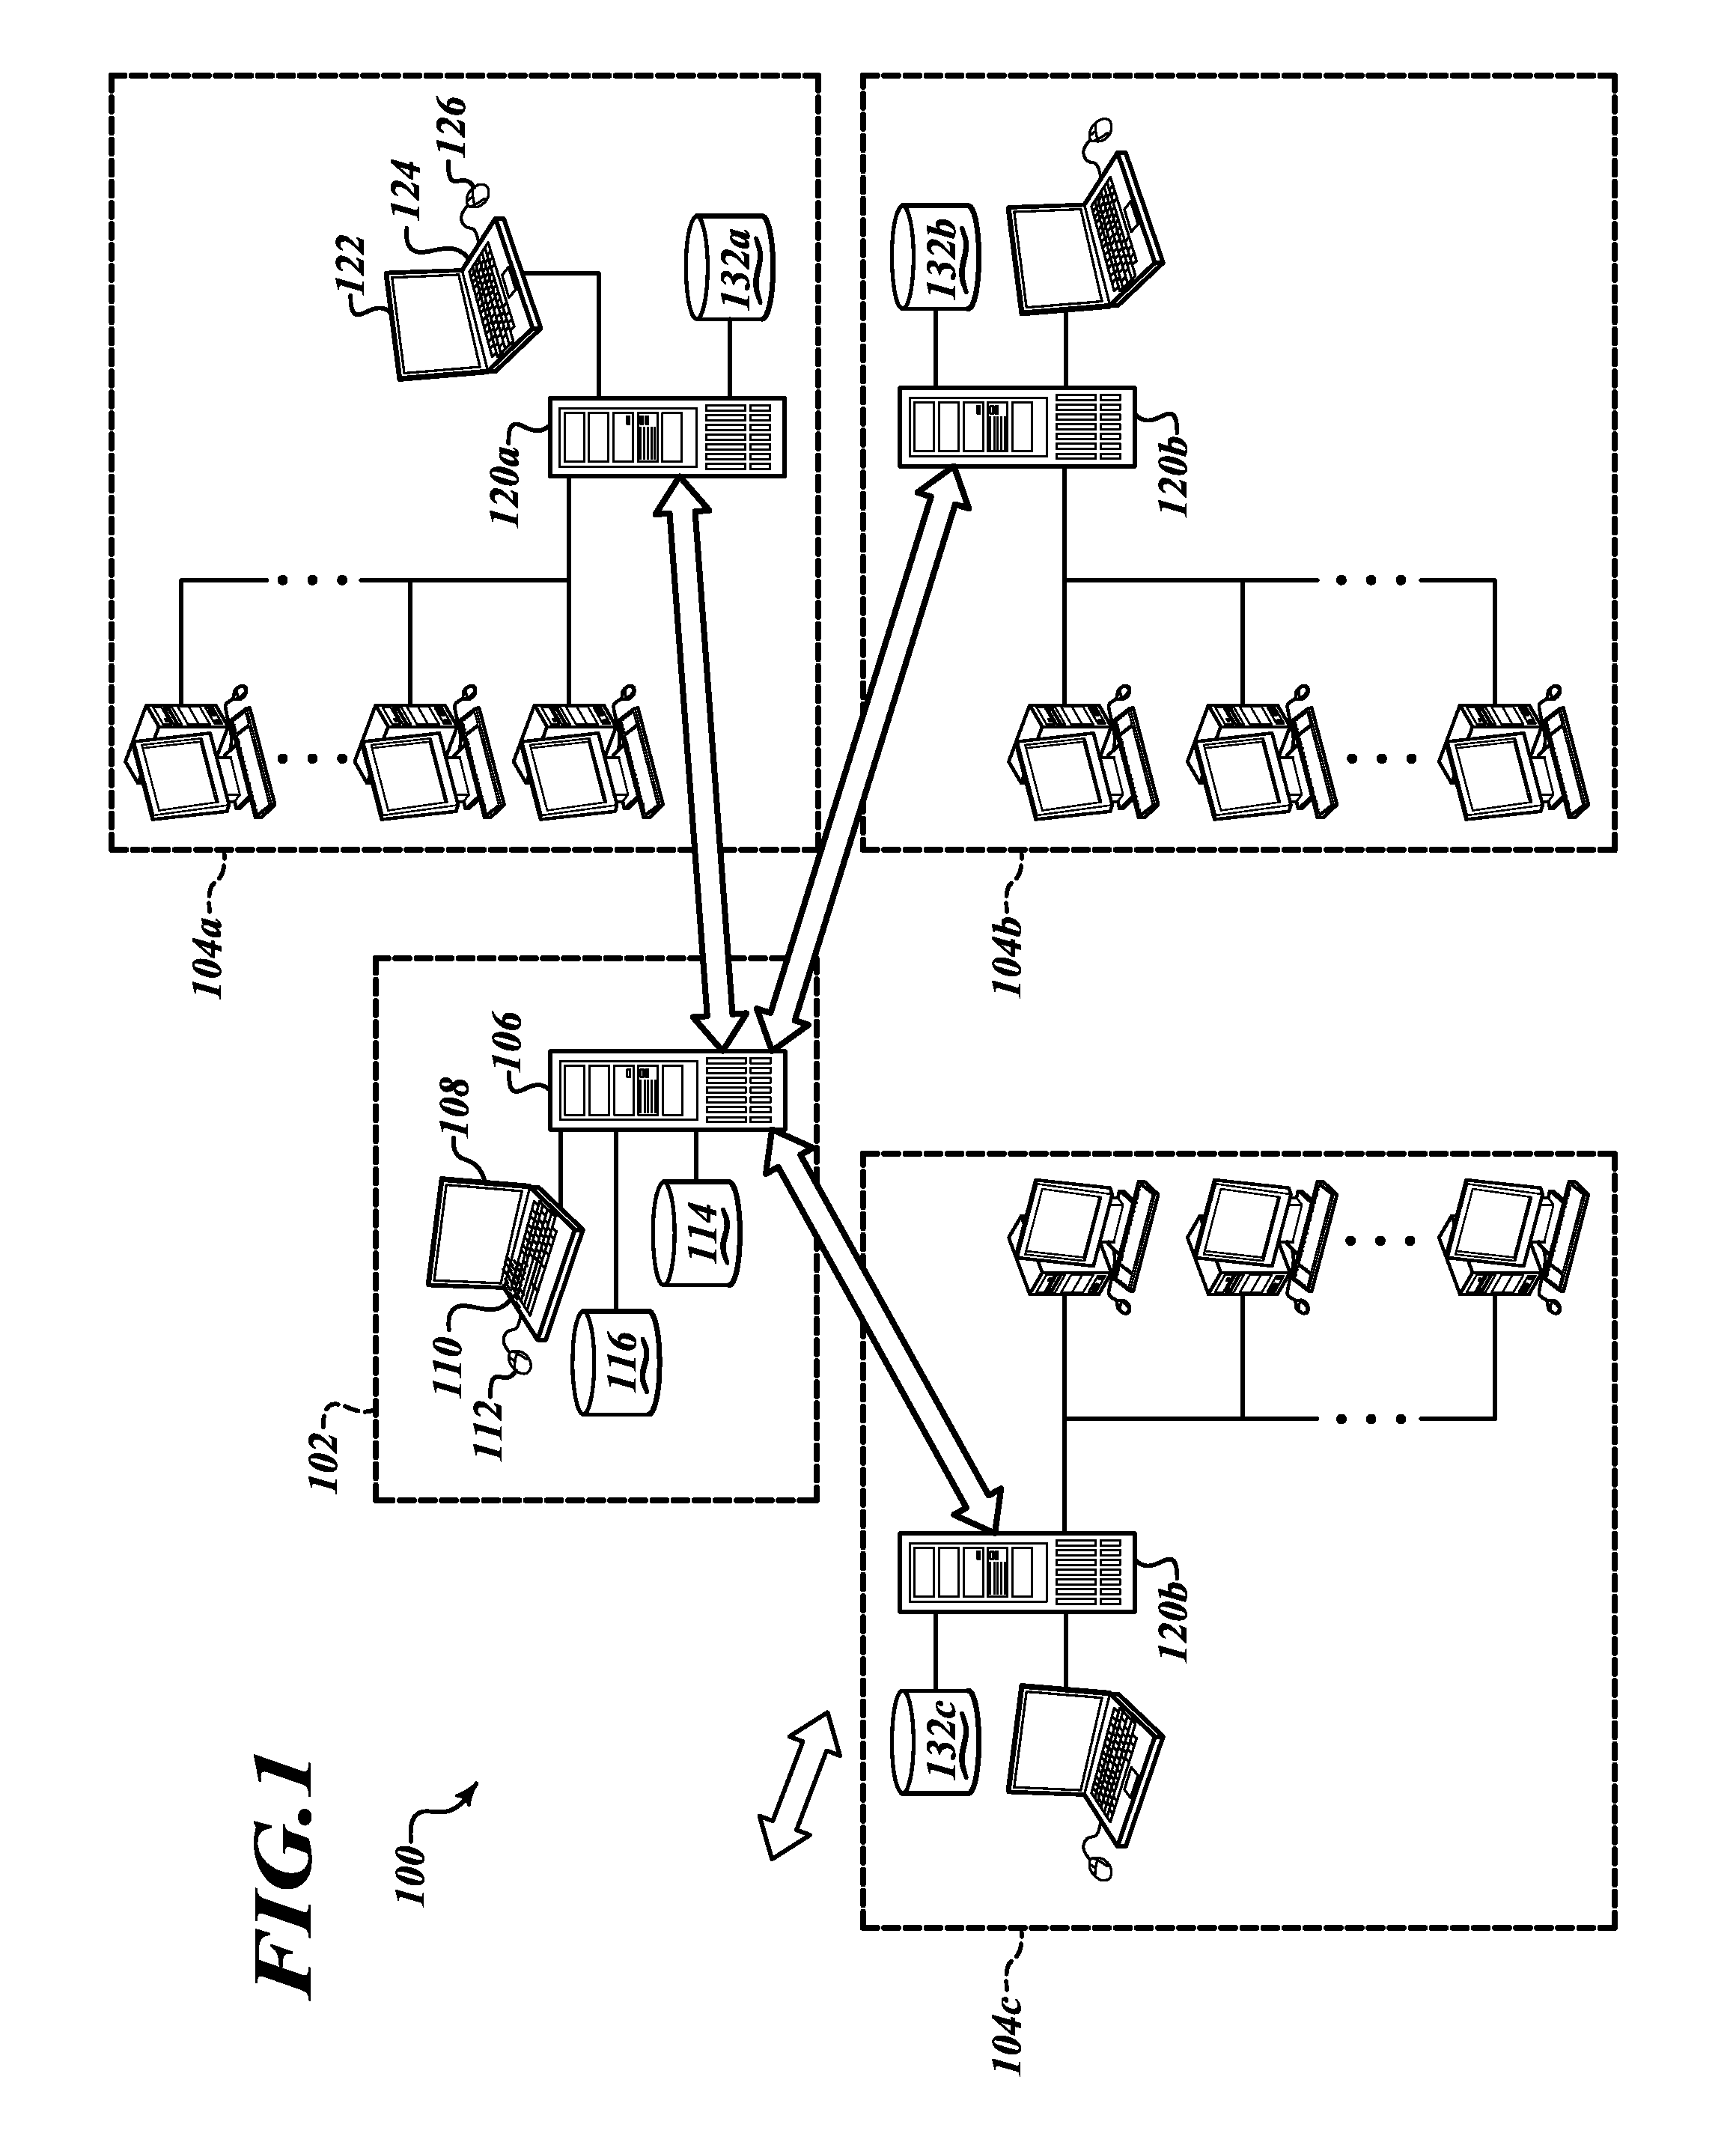 Apparatus, method and article to manage electronic or digital documents in networked environment